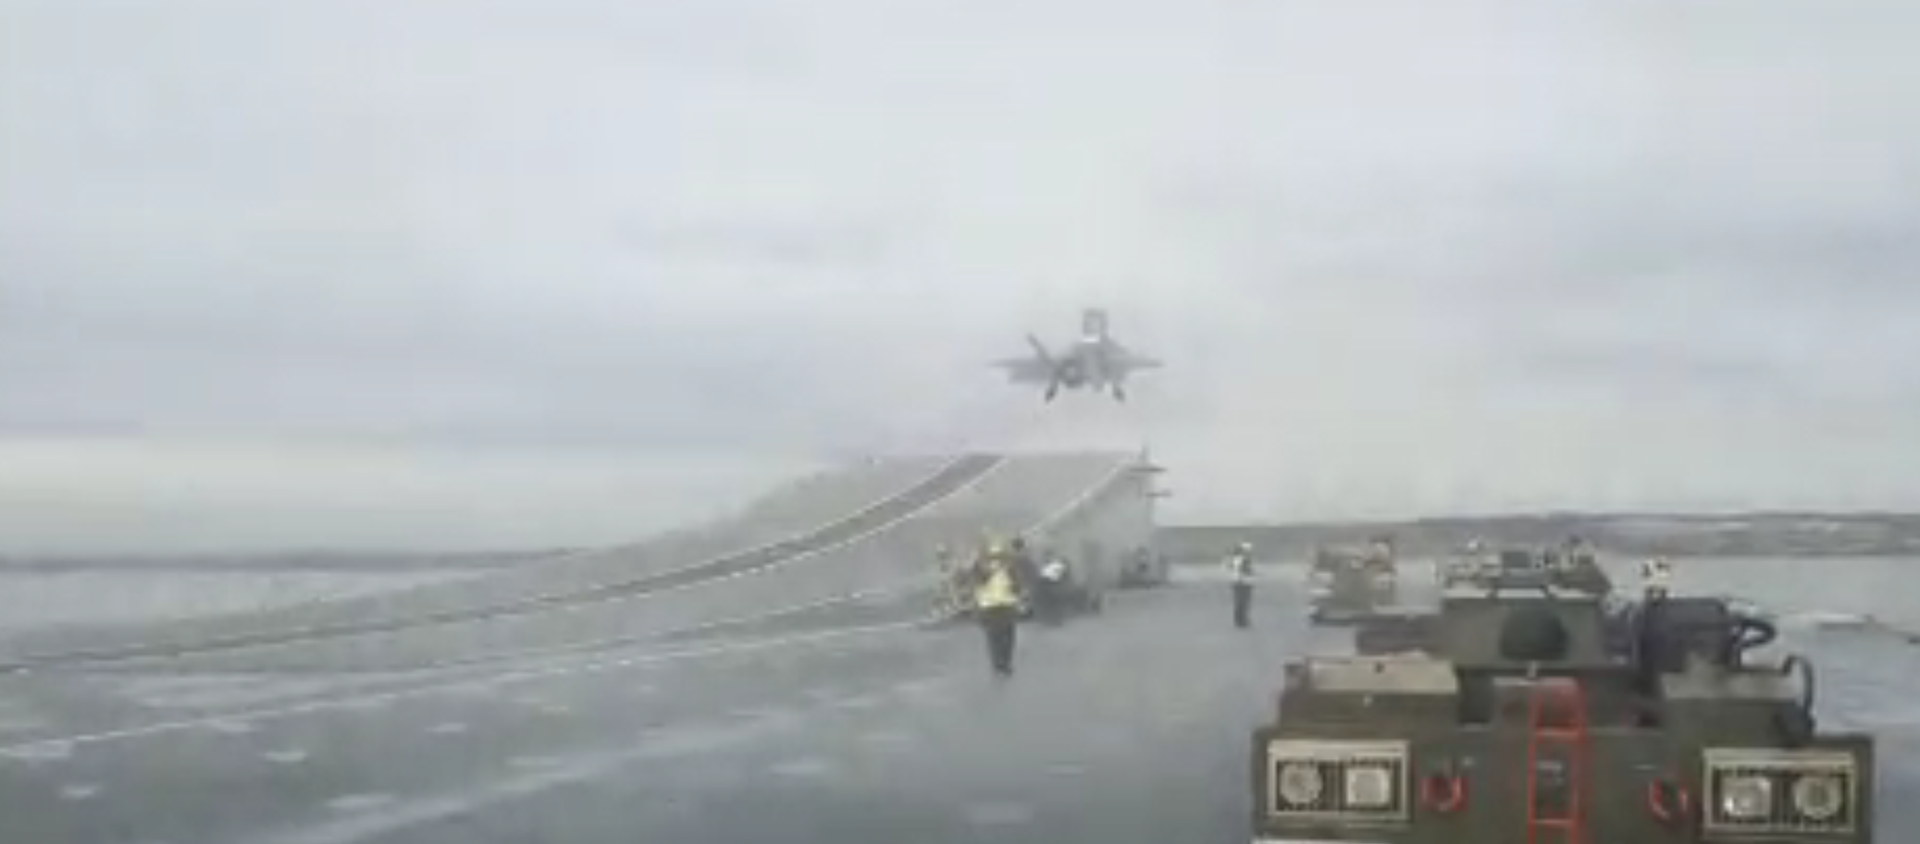 An F-35B takes off from the HMS Queen Elizabeth for the first time - Sputnik International, 1920, 16.12.2019